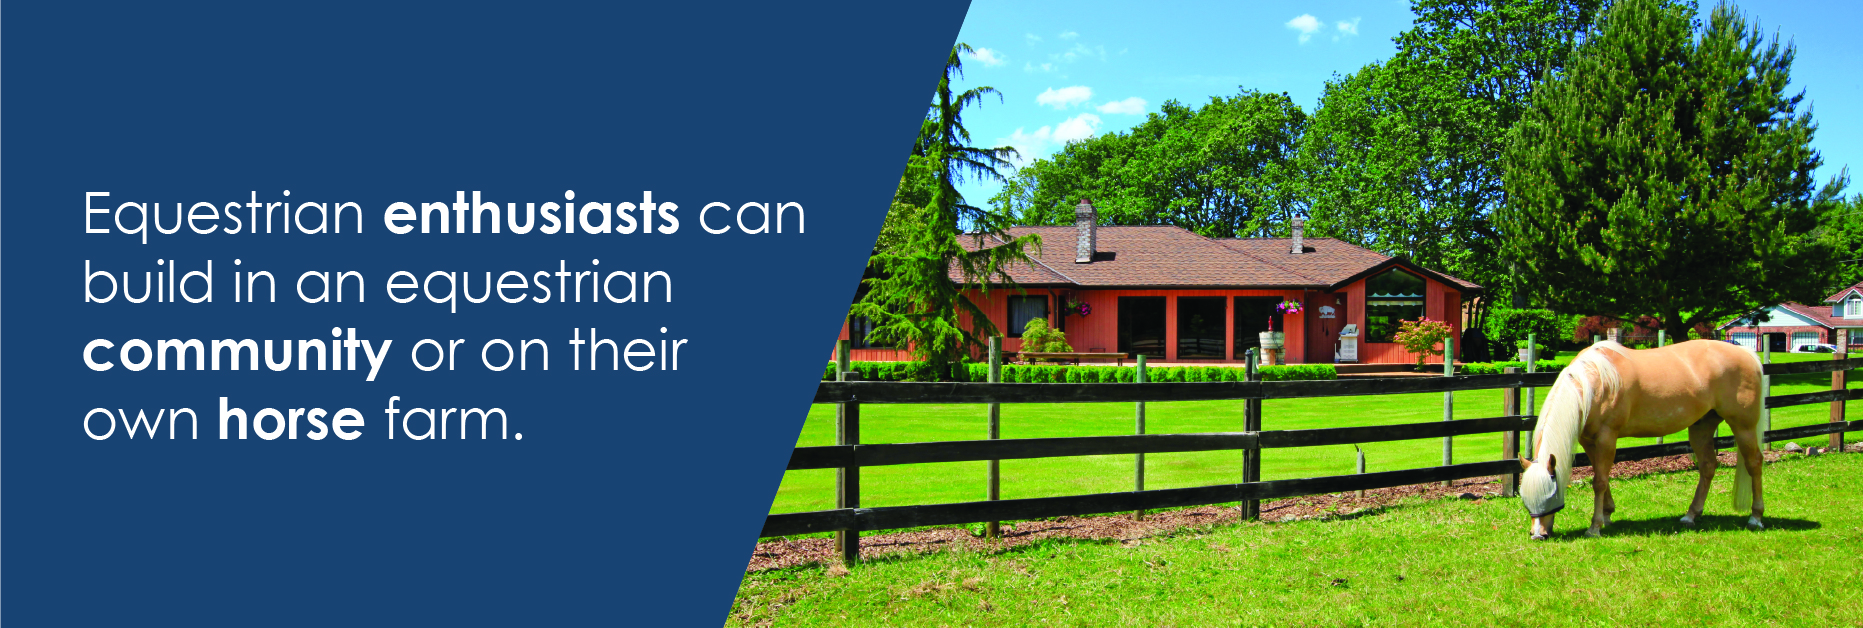 Equestrian enthusiasts can build in an equine community or on farm land.